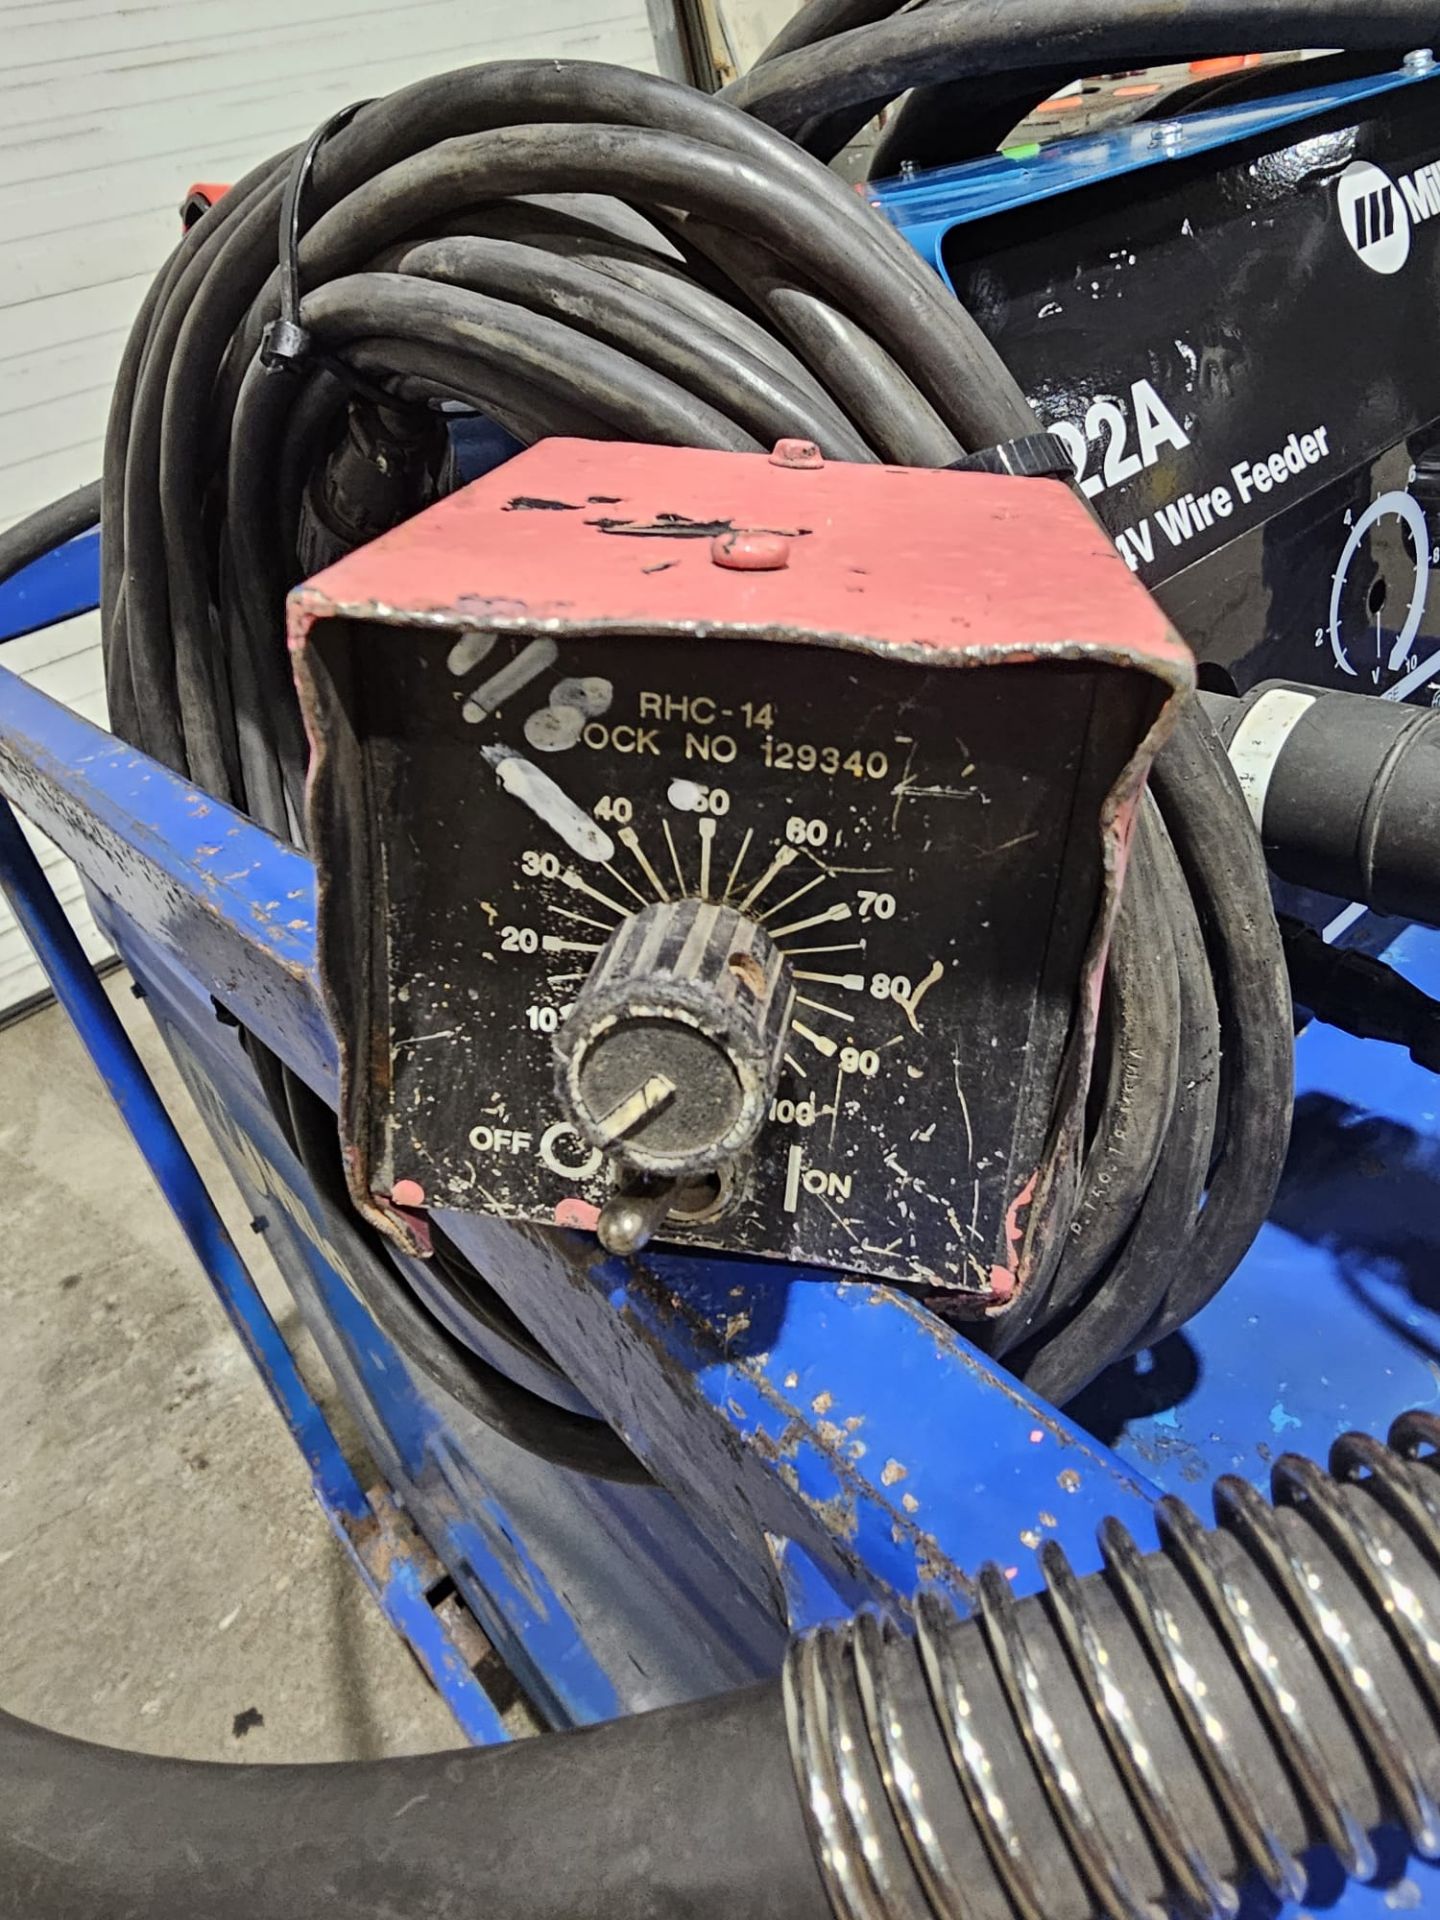 Miller Dimension 652 Mig Welder 650 Amp Mig Tig Stick Multi Process Power Source with 22A Wire - Image 10 of 10